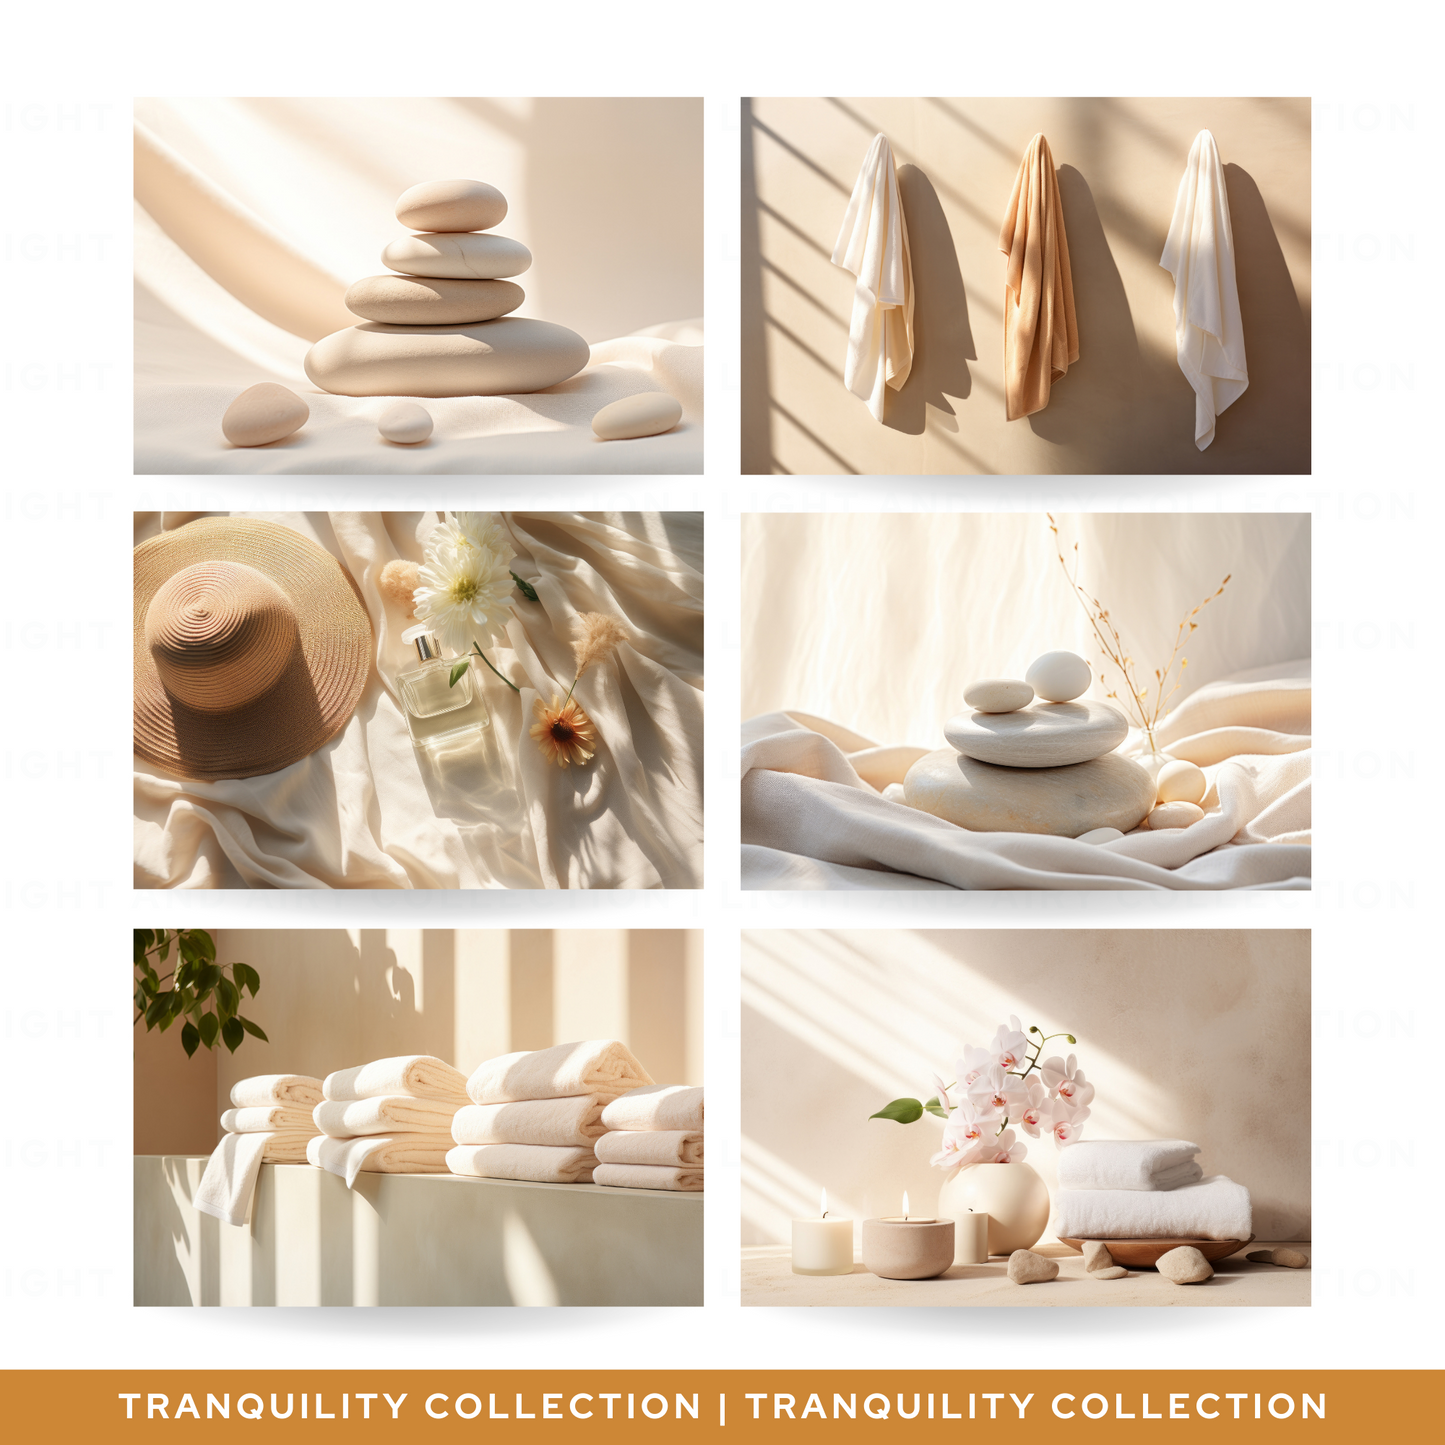 11 Styled Stock Images | Tranquility Collection